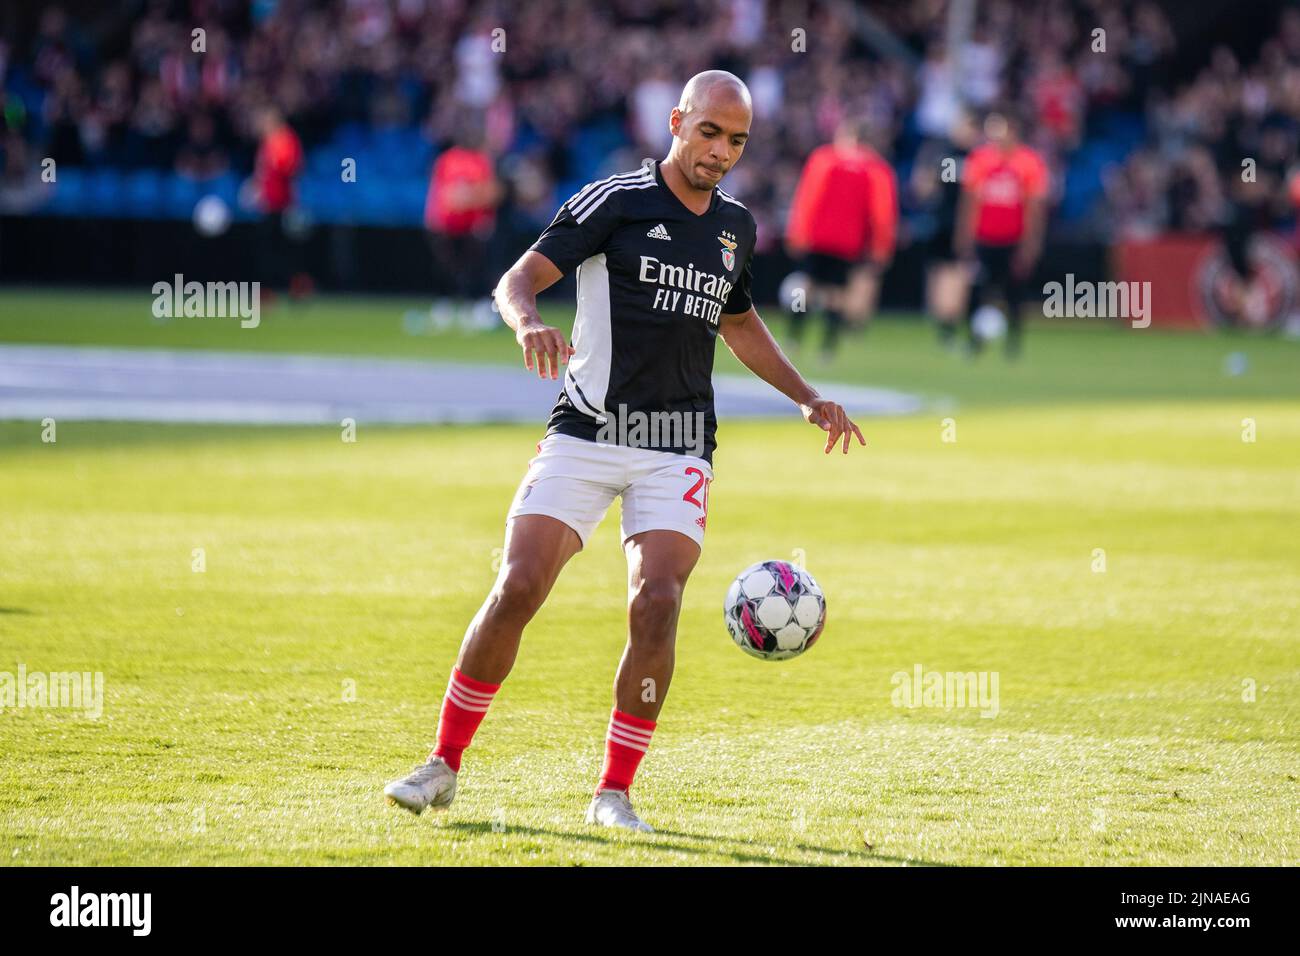 Randers, Denmark. 09th, August 2022. Joao Mario (20) of Benfica seen during the warm up before the UEFA Champions League qualification match between FC Midtjylland and Benfica at Cepheus Park in Randers. (Photo credit: Gonzales Photo - Balazs Popal). Stock Photo